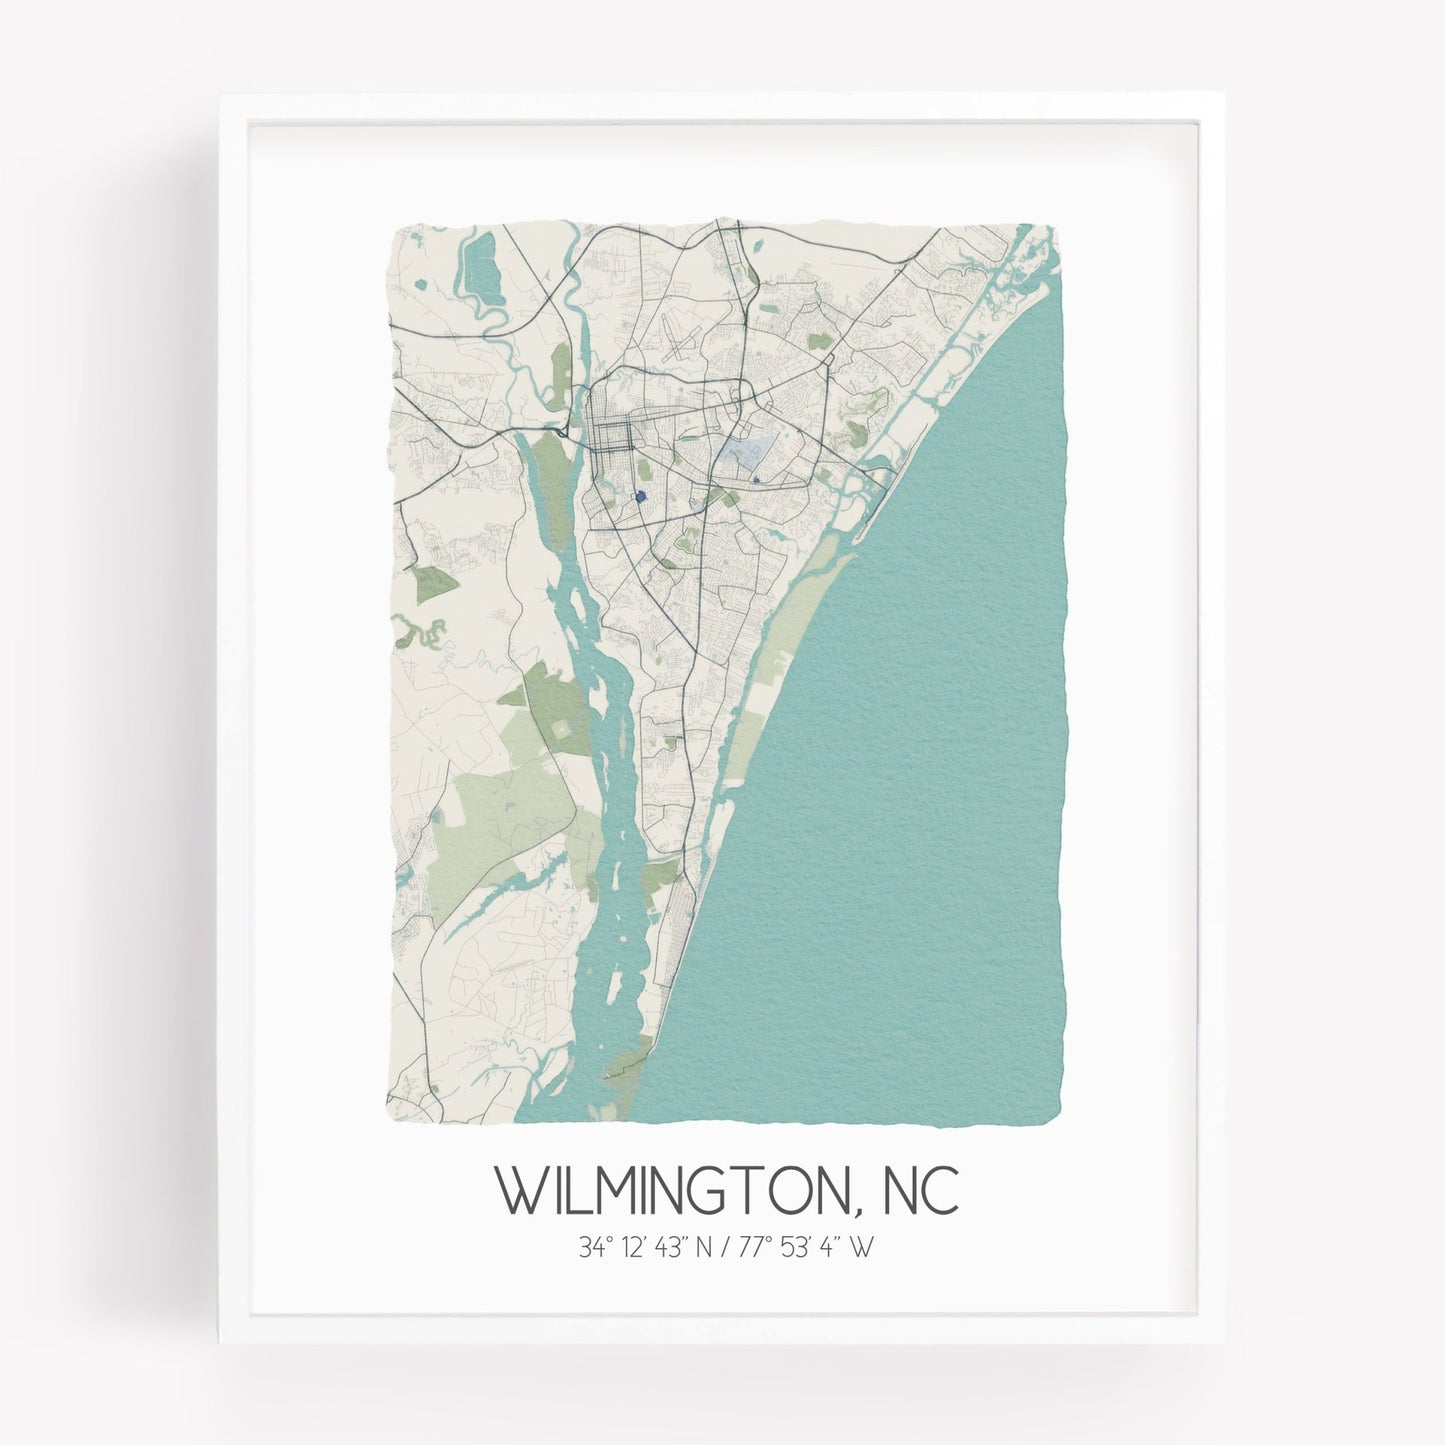 A city map print of Wilmington North Carolina, in the color beige